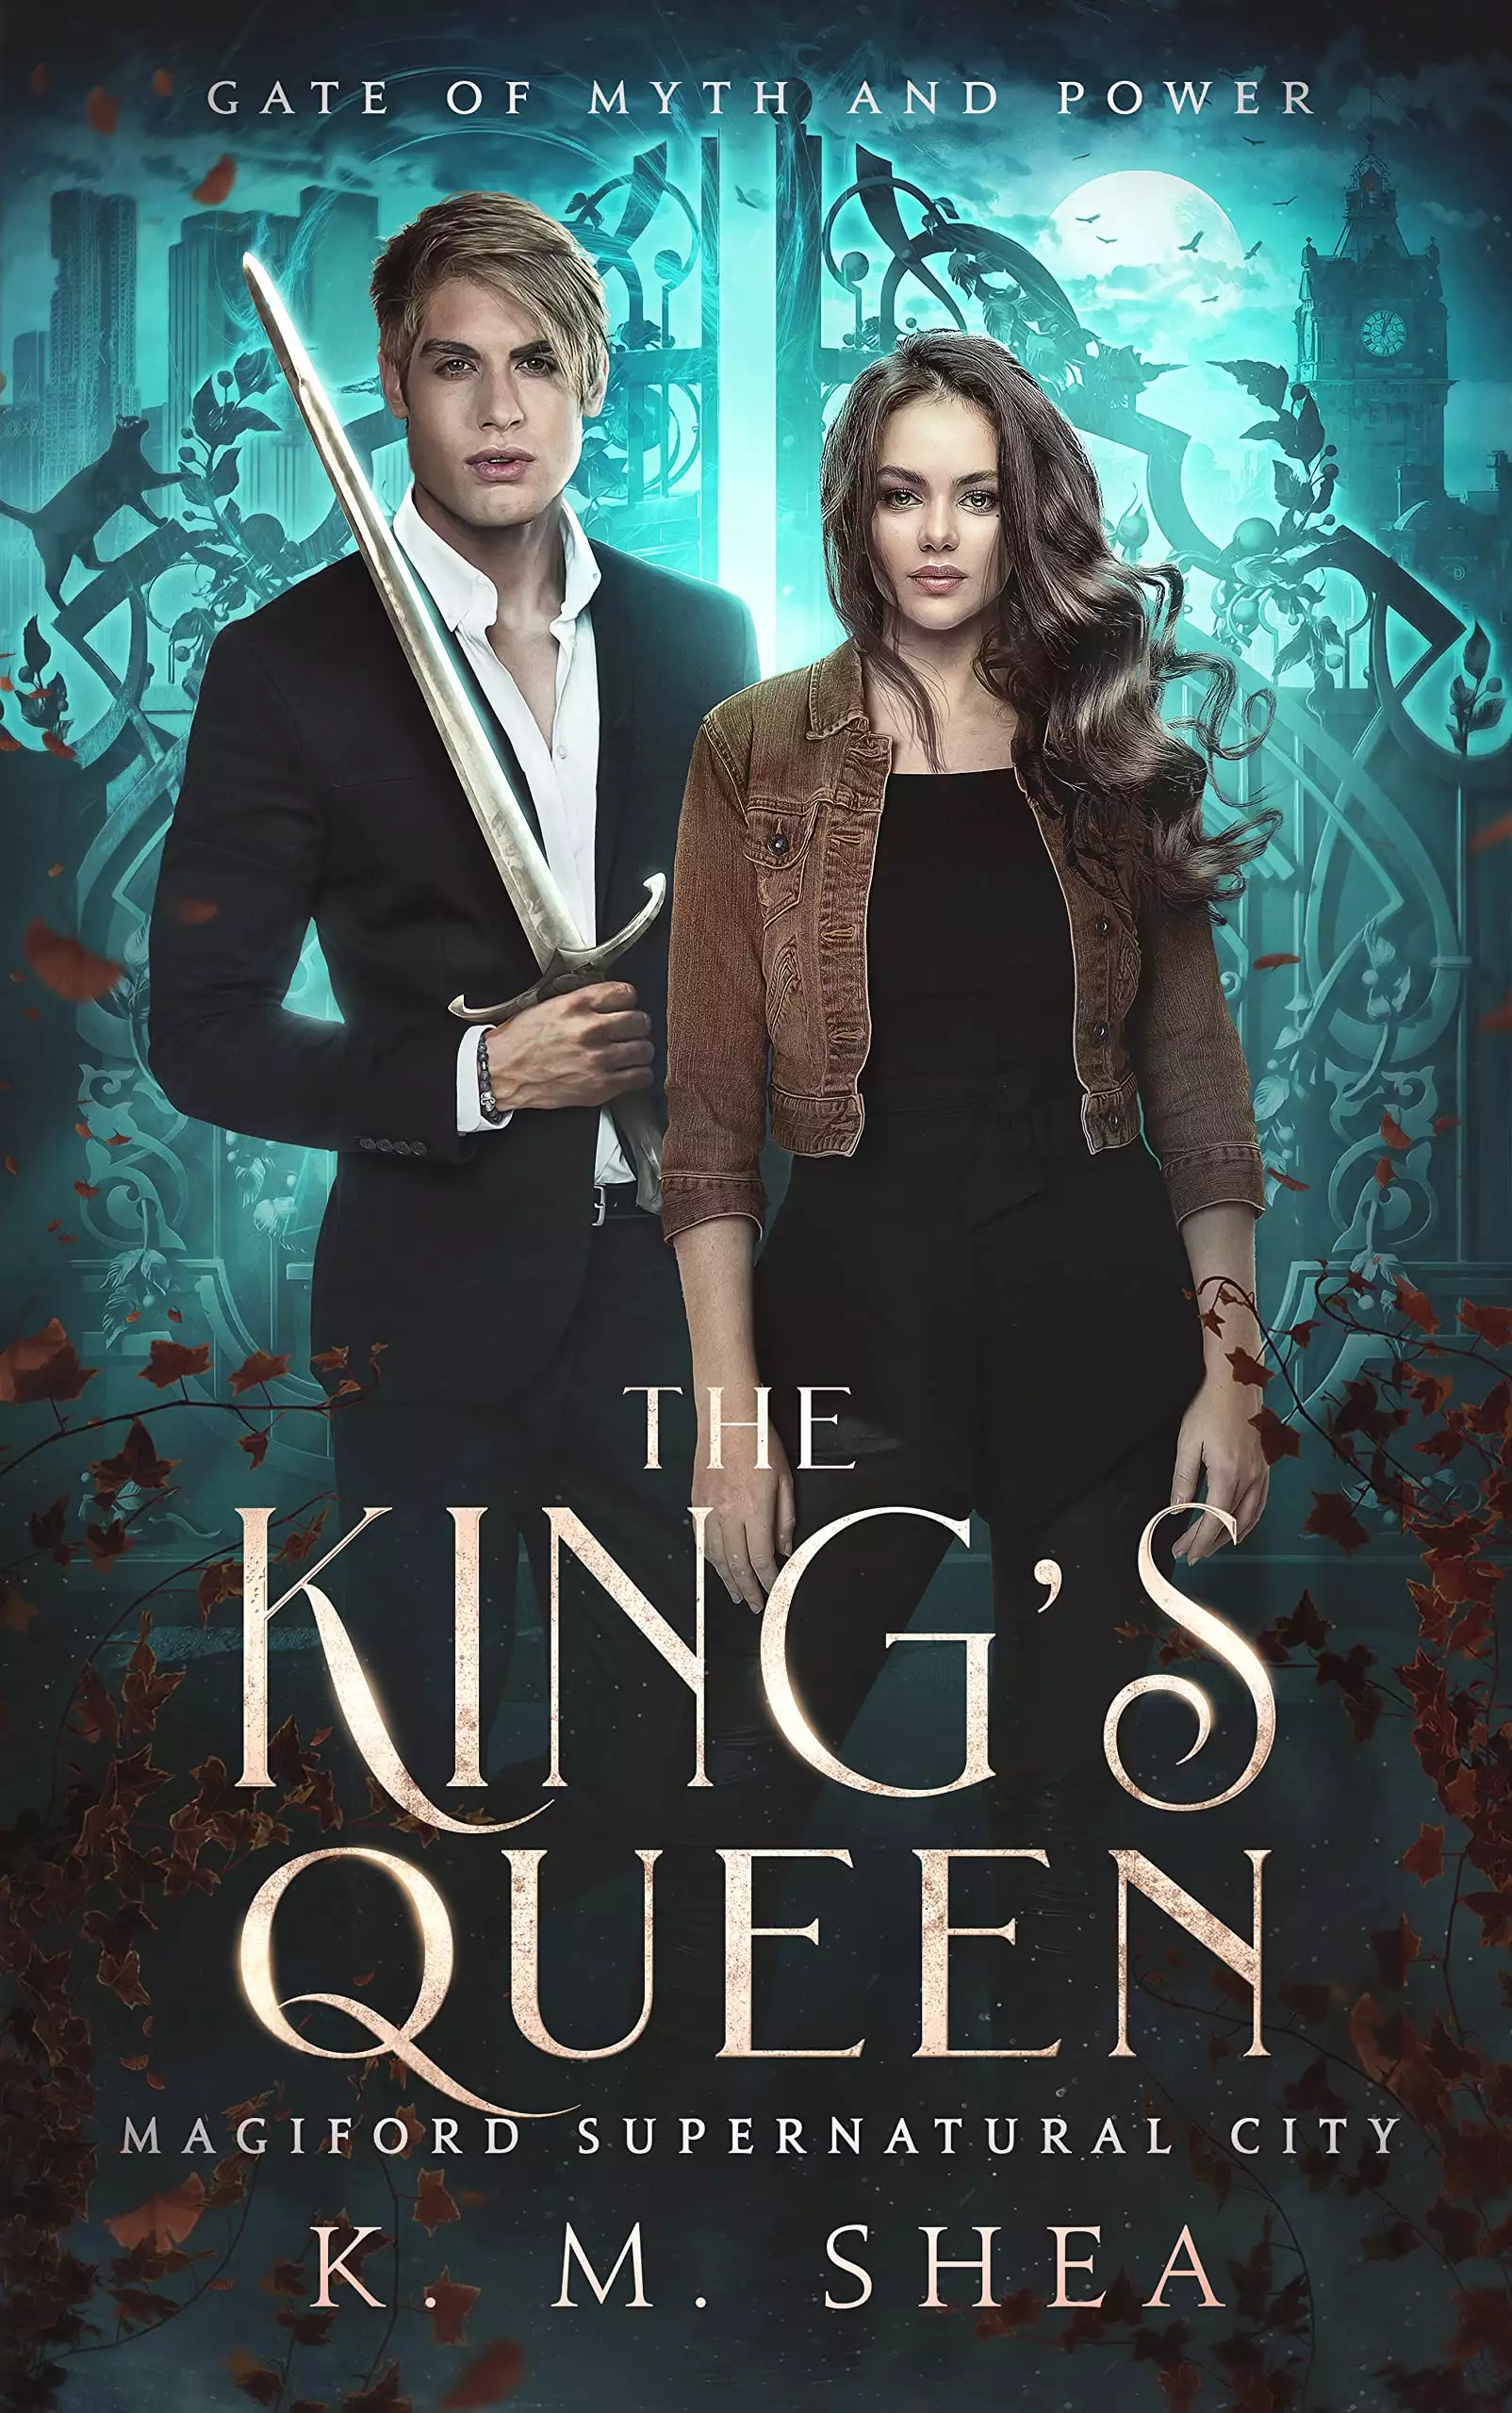 The King's Queen: Magiford Supernatural City